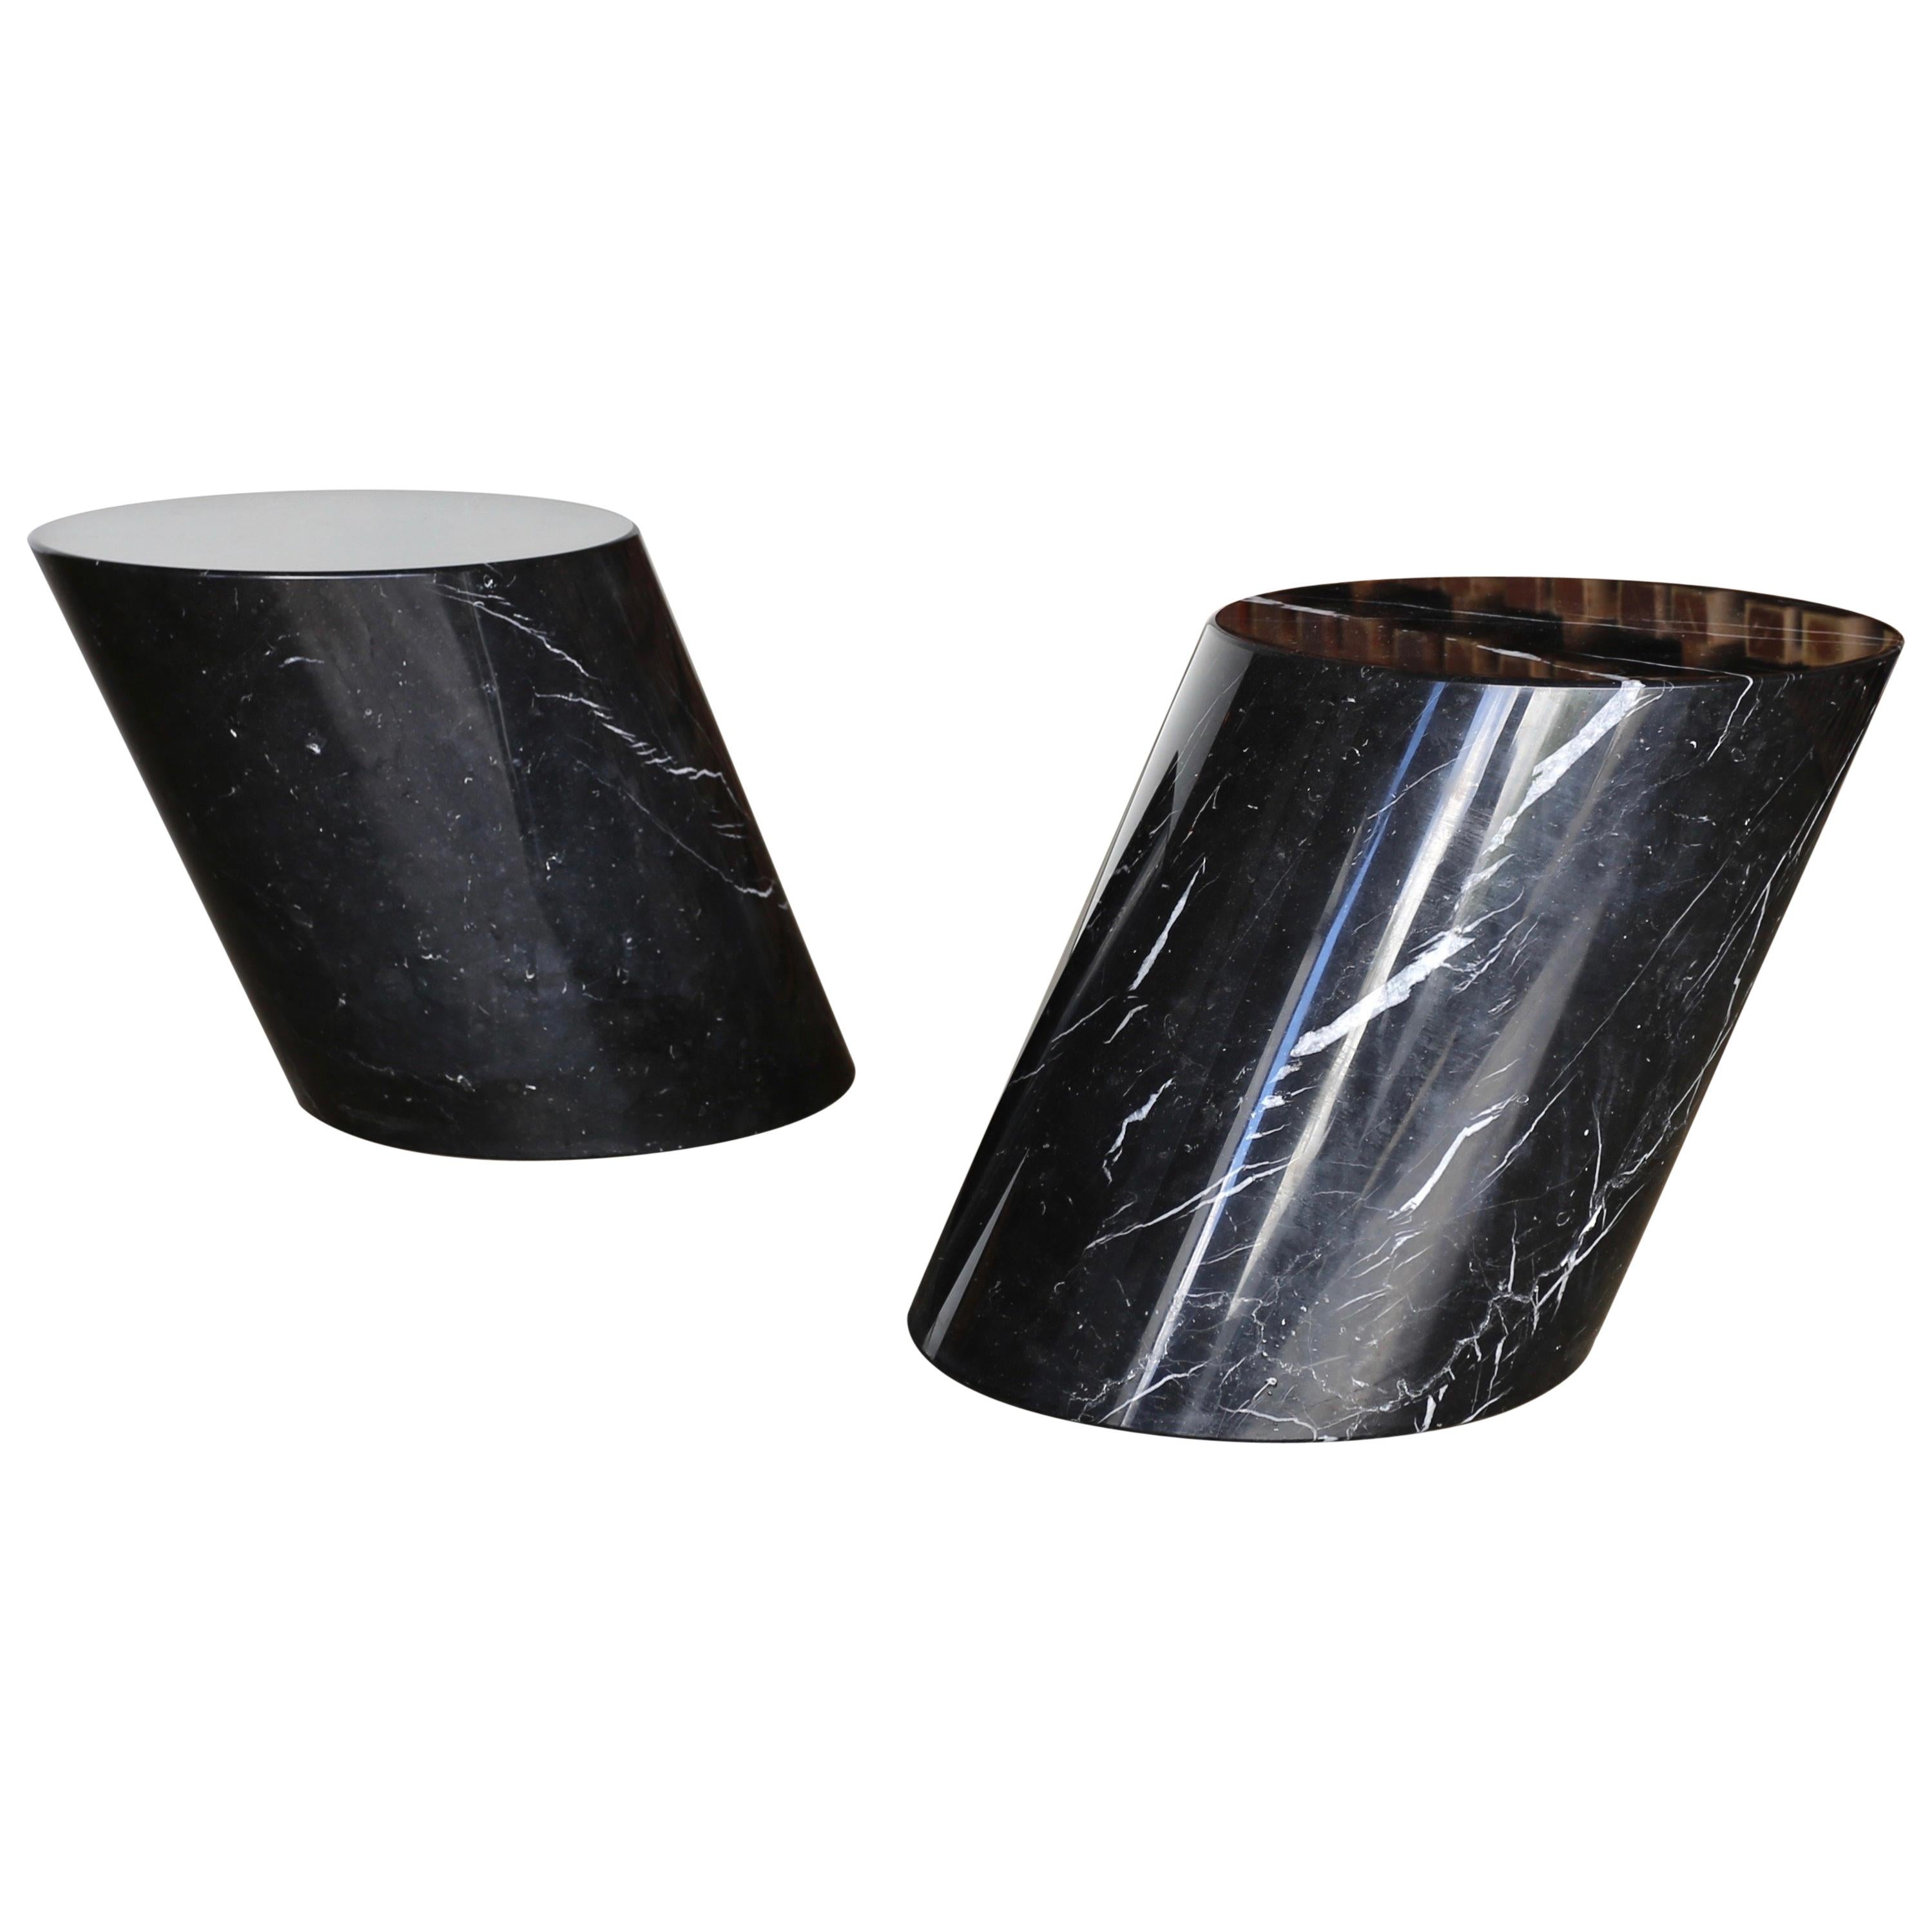 Marble Stump Table by Lucia Mercer for Knoll